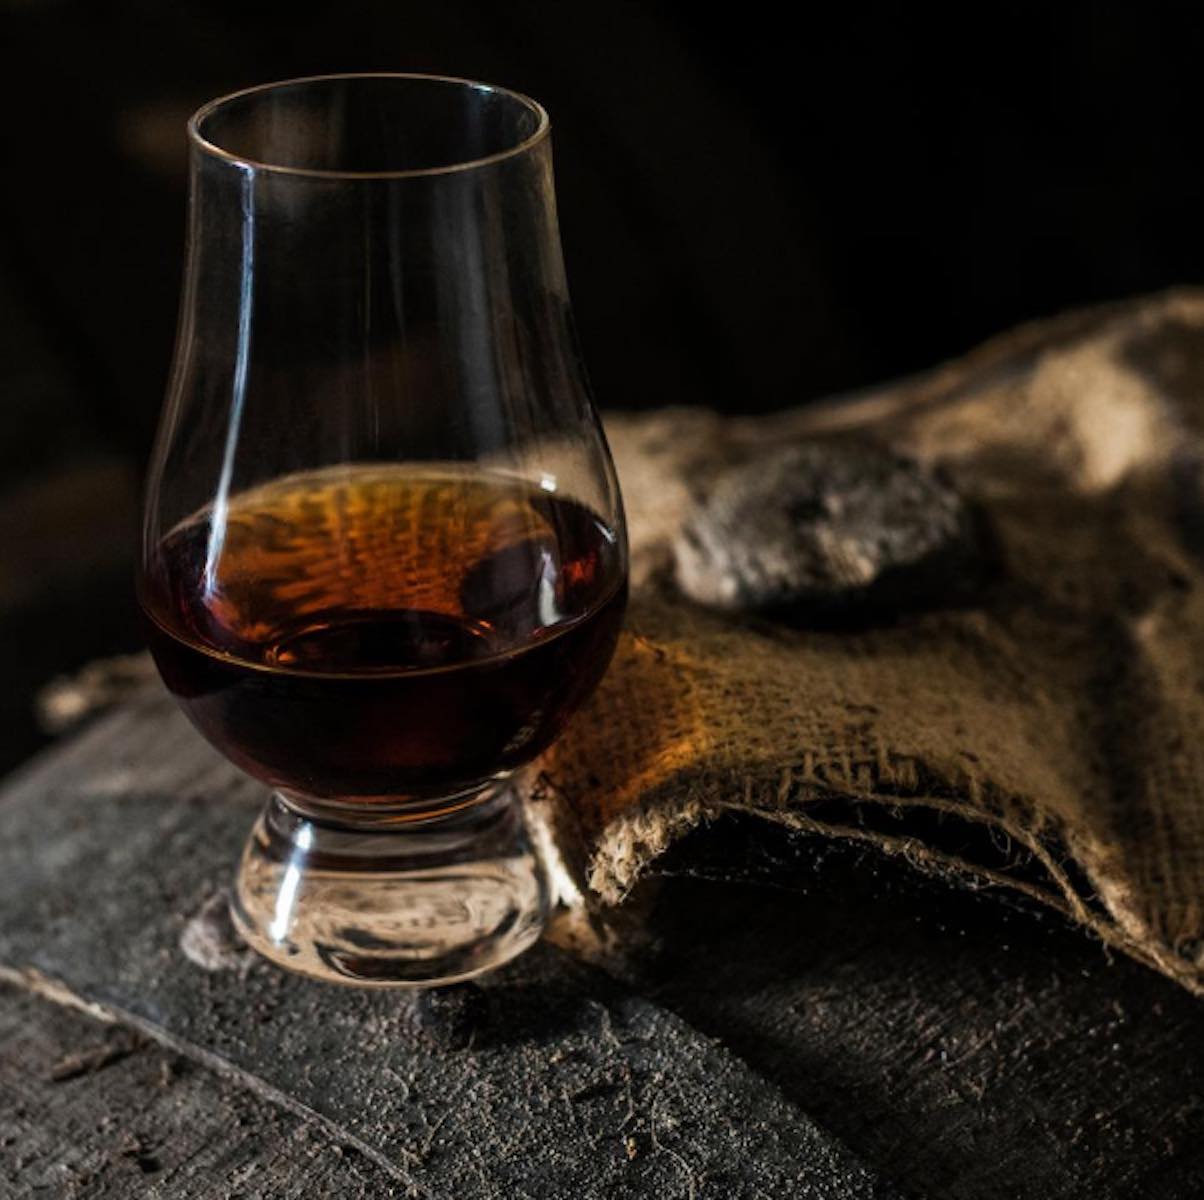 What does single cask whisky mean?